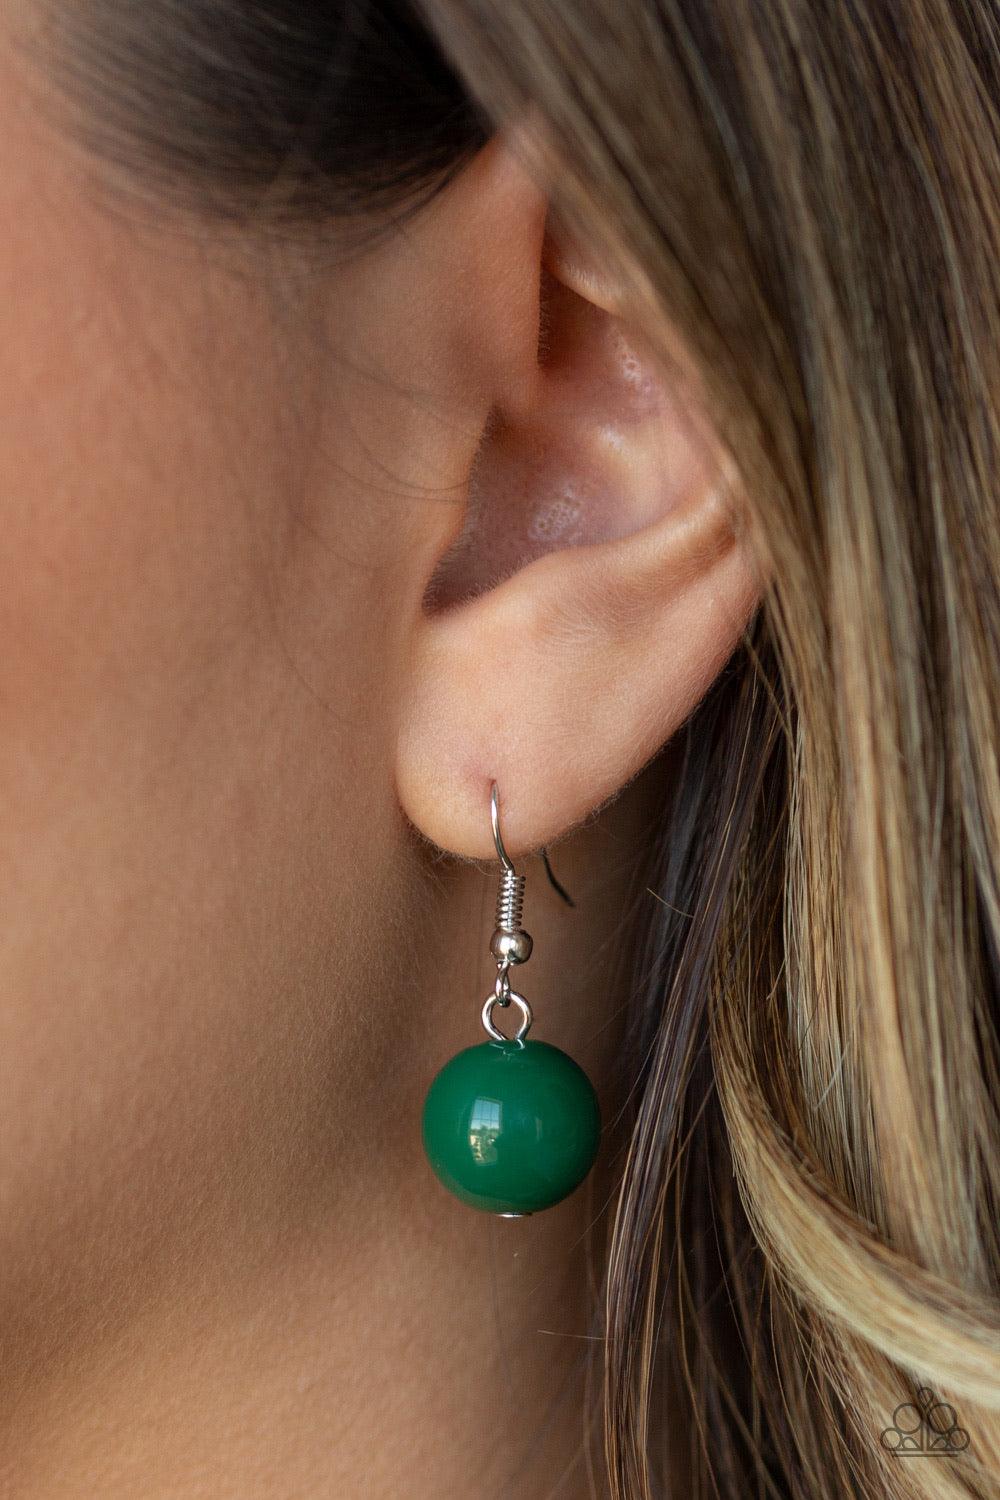 Paparazzi Accessories Poppin Popularity - Green Infused with dainty Eden beads, round Eden beads trickle into bold oval beads, creating a bold pop of color below the collar. Features an adjustable clasp closure. Jewelry